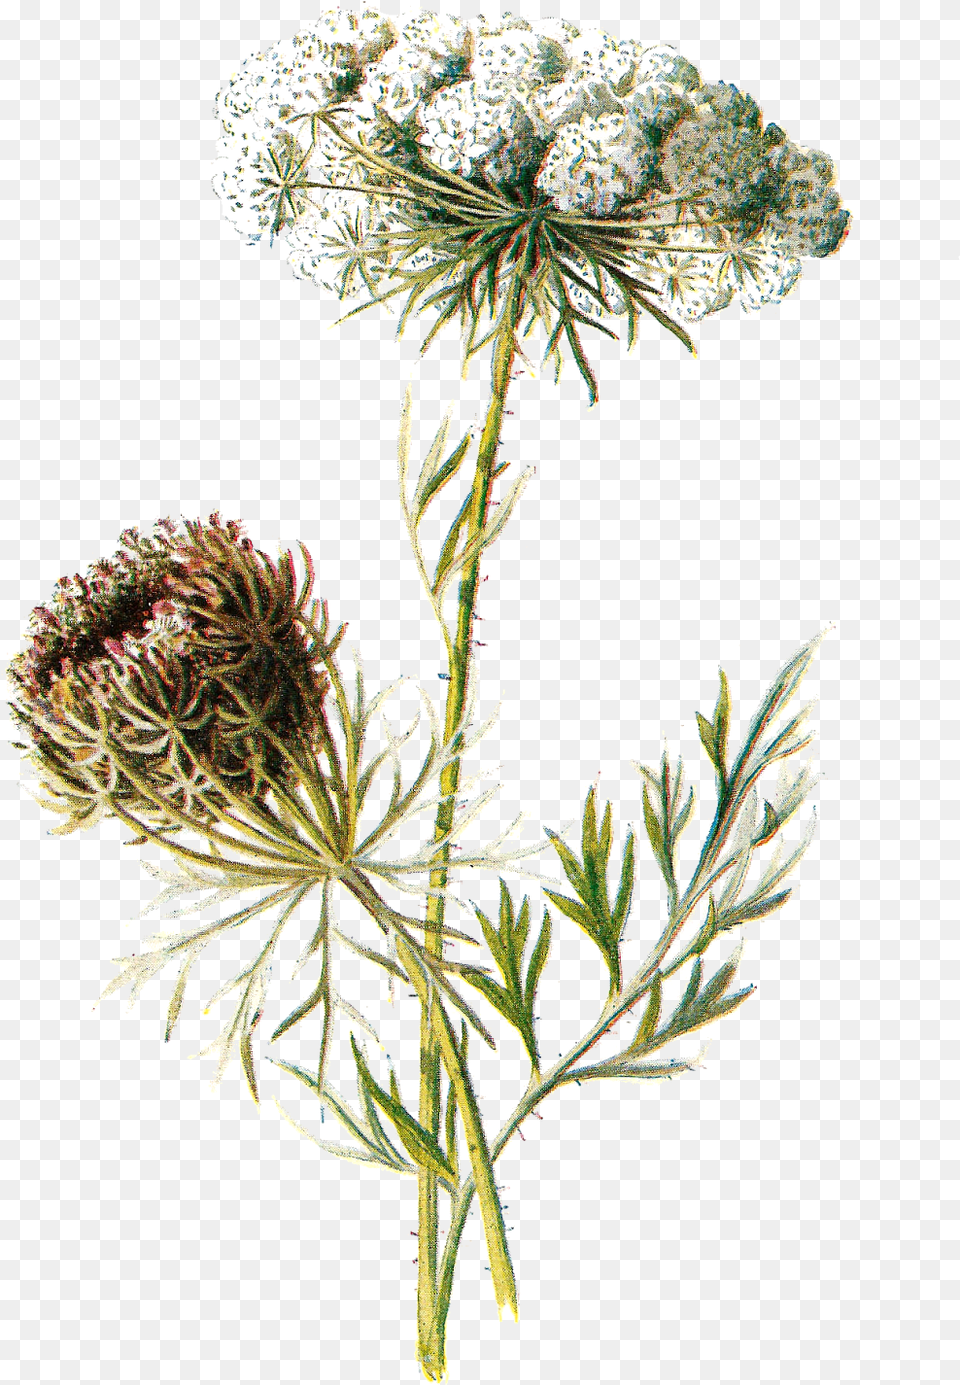 Wildflower Vector Illustration Royalty Free Stock Wildflowers With Transparent Background, Apiaceae, Flower, Plant, Herbal Png